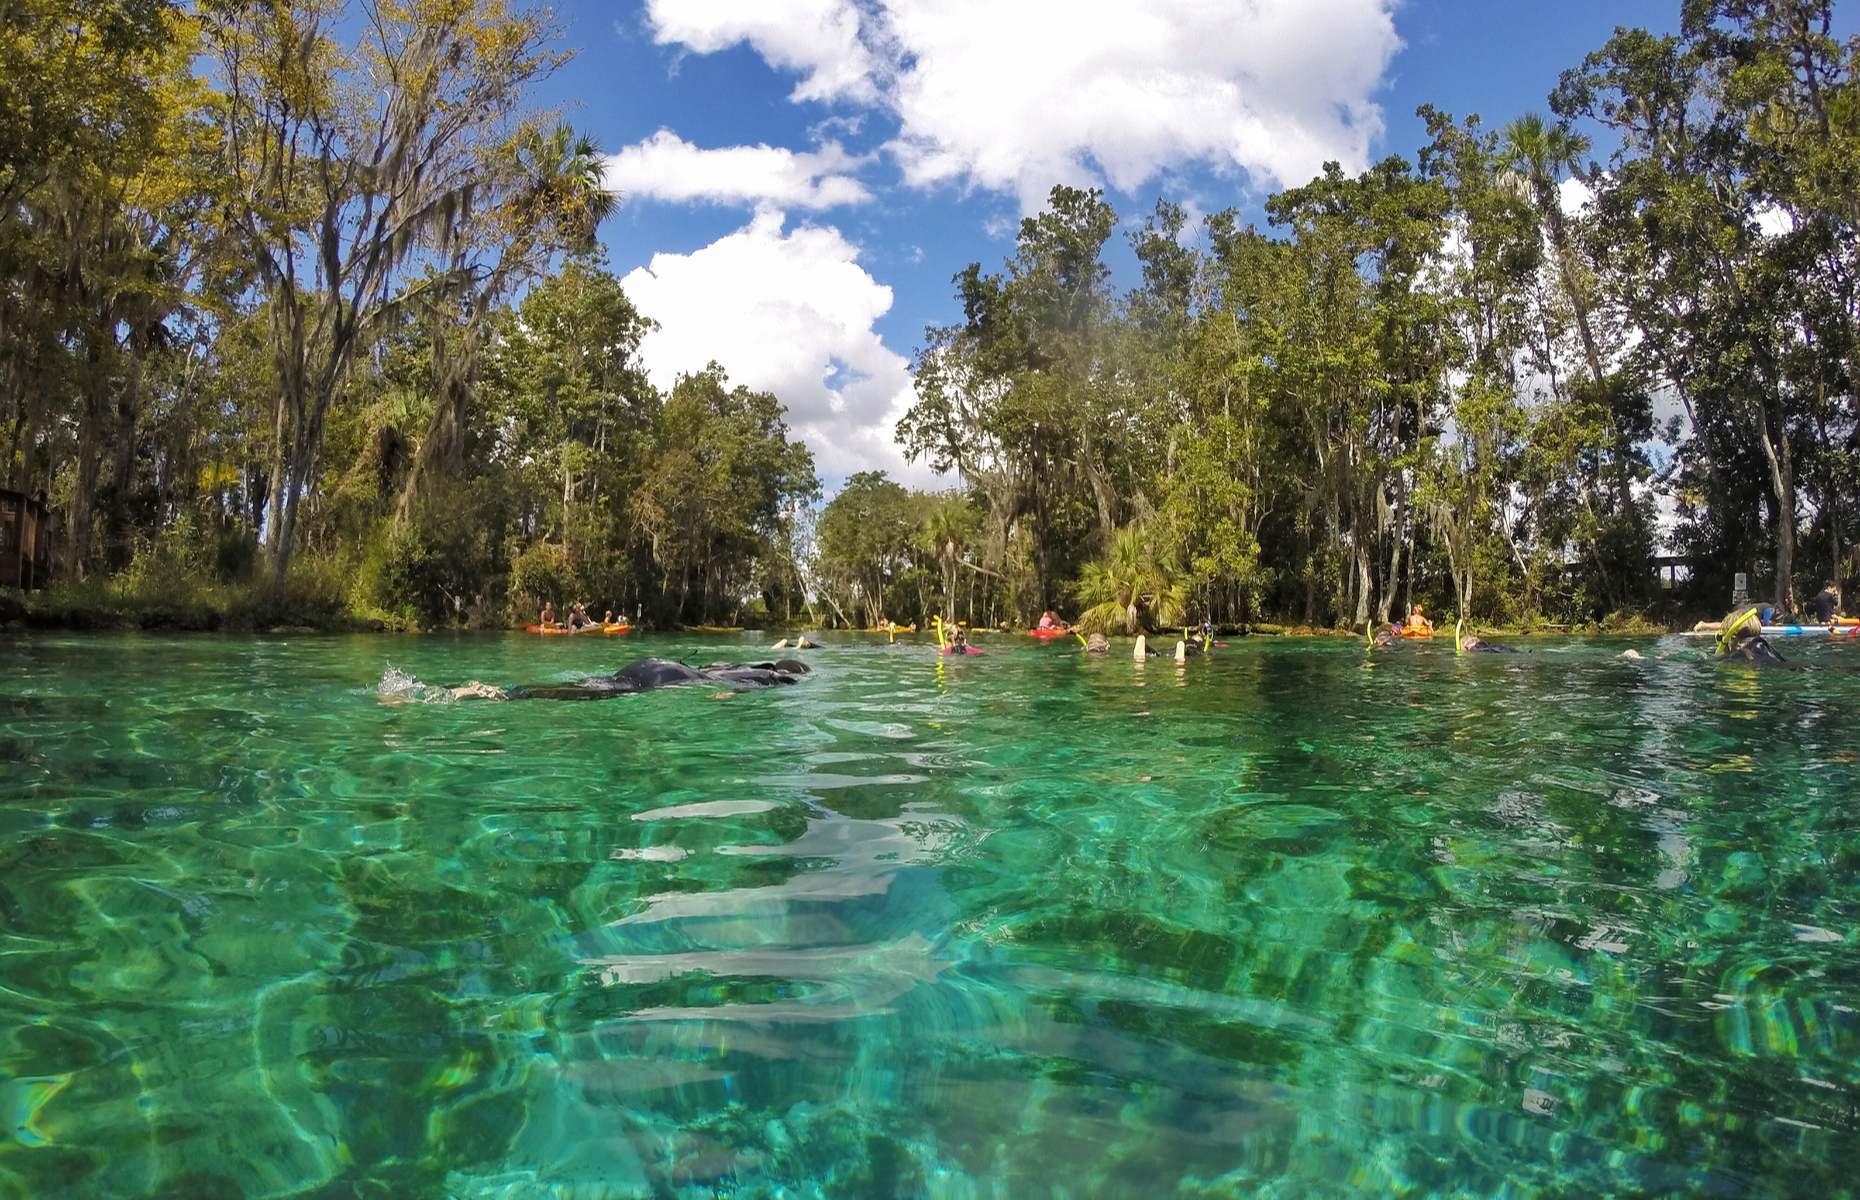 In cooler months manatees flock to the balmy natural springs around Crystal River, a small city that’s roughly a 90-minute drive north of Tampa on Florida’s west coast. Aside from swimming with these beautiful creatures in their natural habitat – at the only place in the US where it’s legal to do so – tourists can swim in the crystal-clear waters of the springs, or enjoy paddleboarding or kayaking.